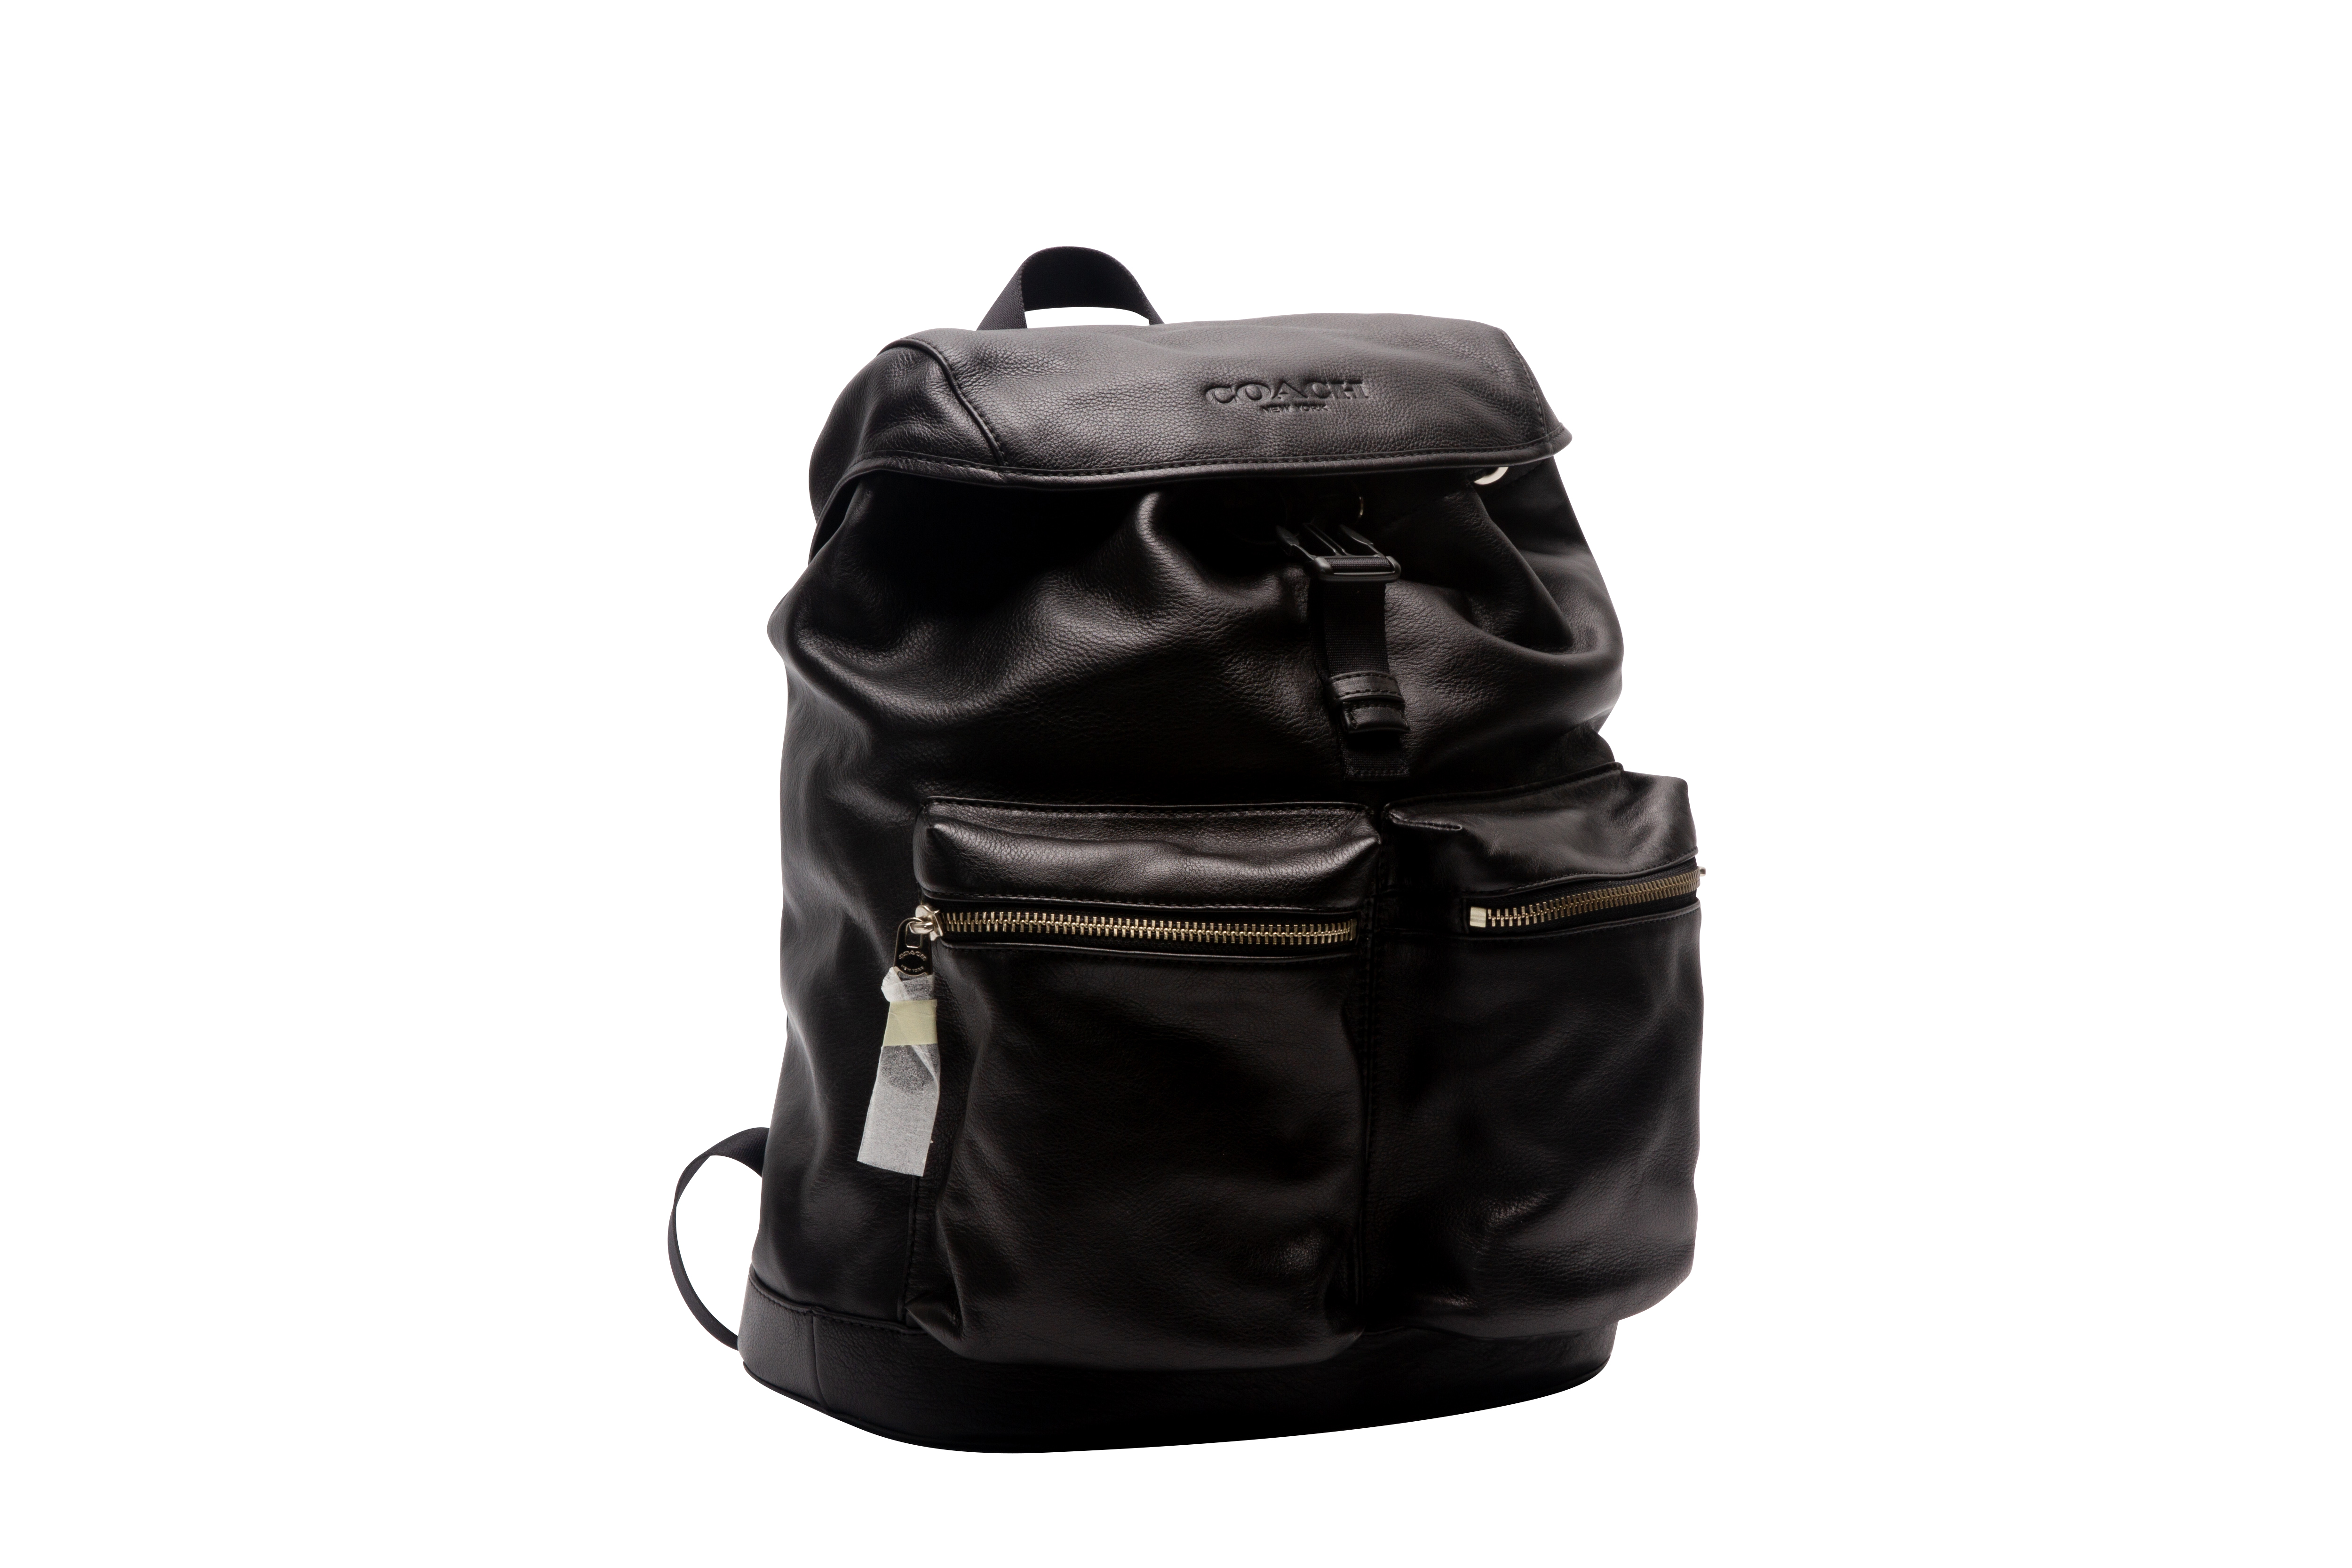 A COACH BLACK LEATHER BACKPACK